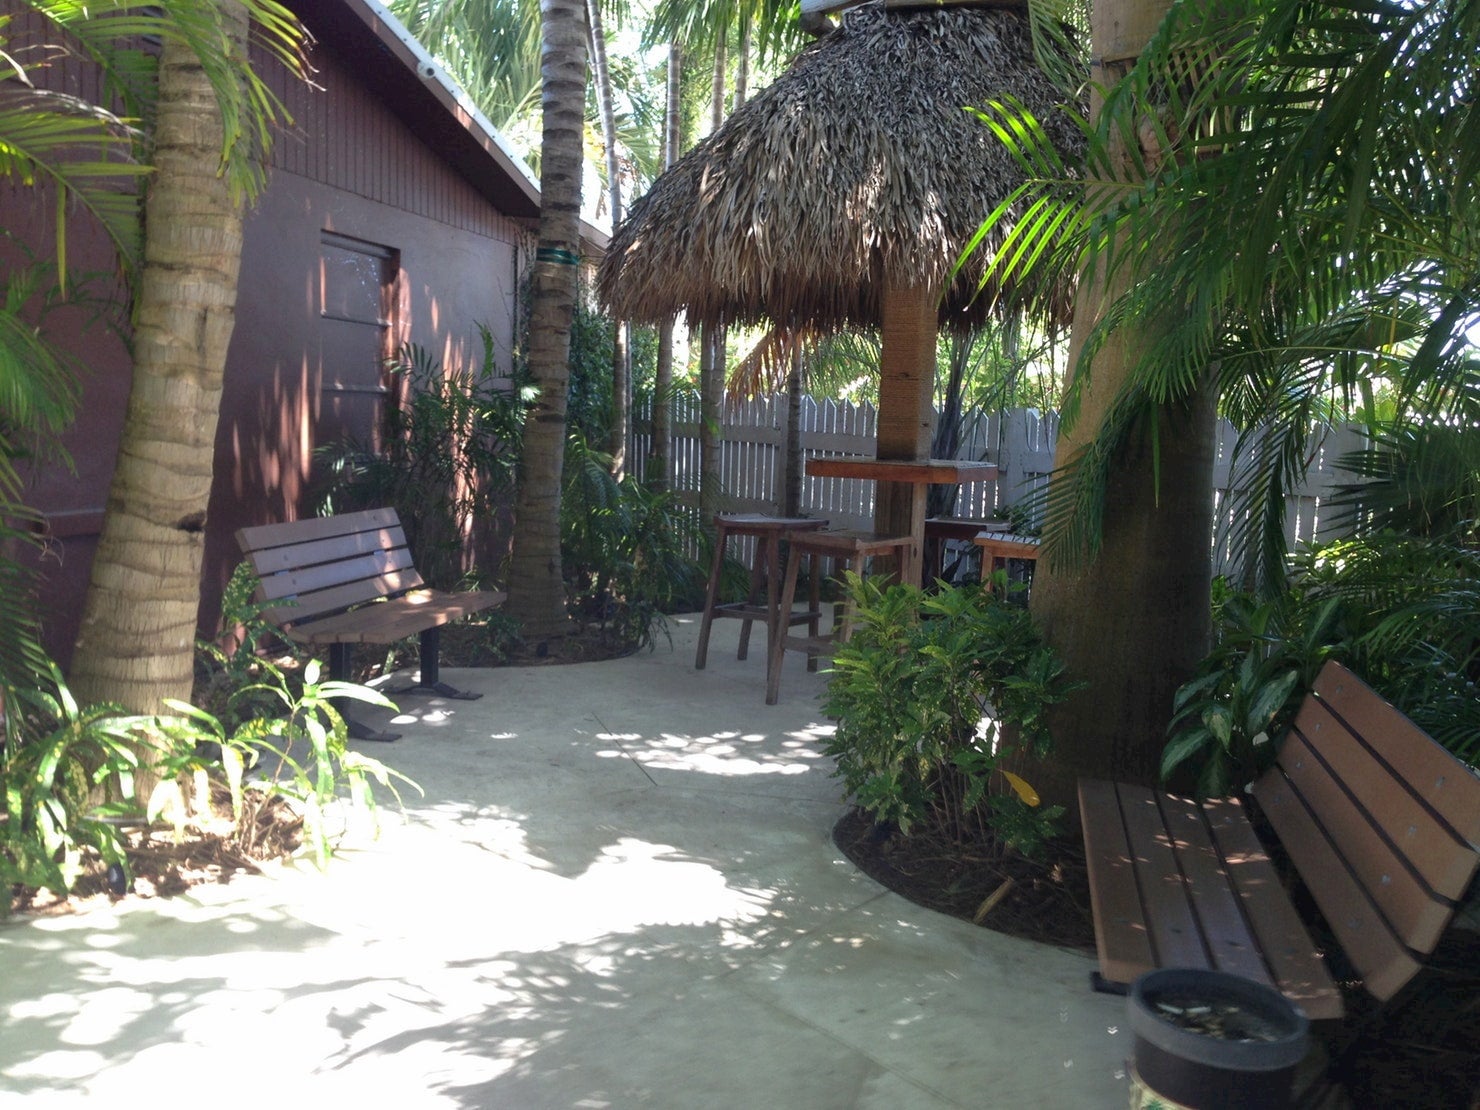 Palm trees and tiki hut surrounded by a terrace.